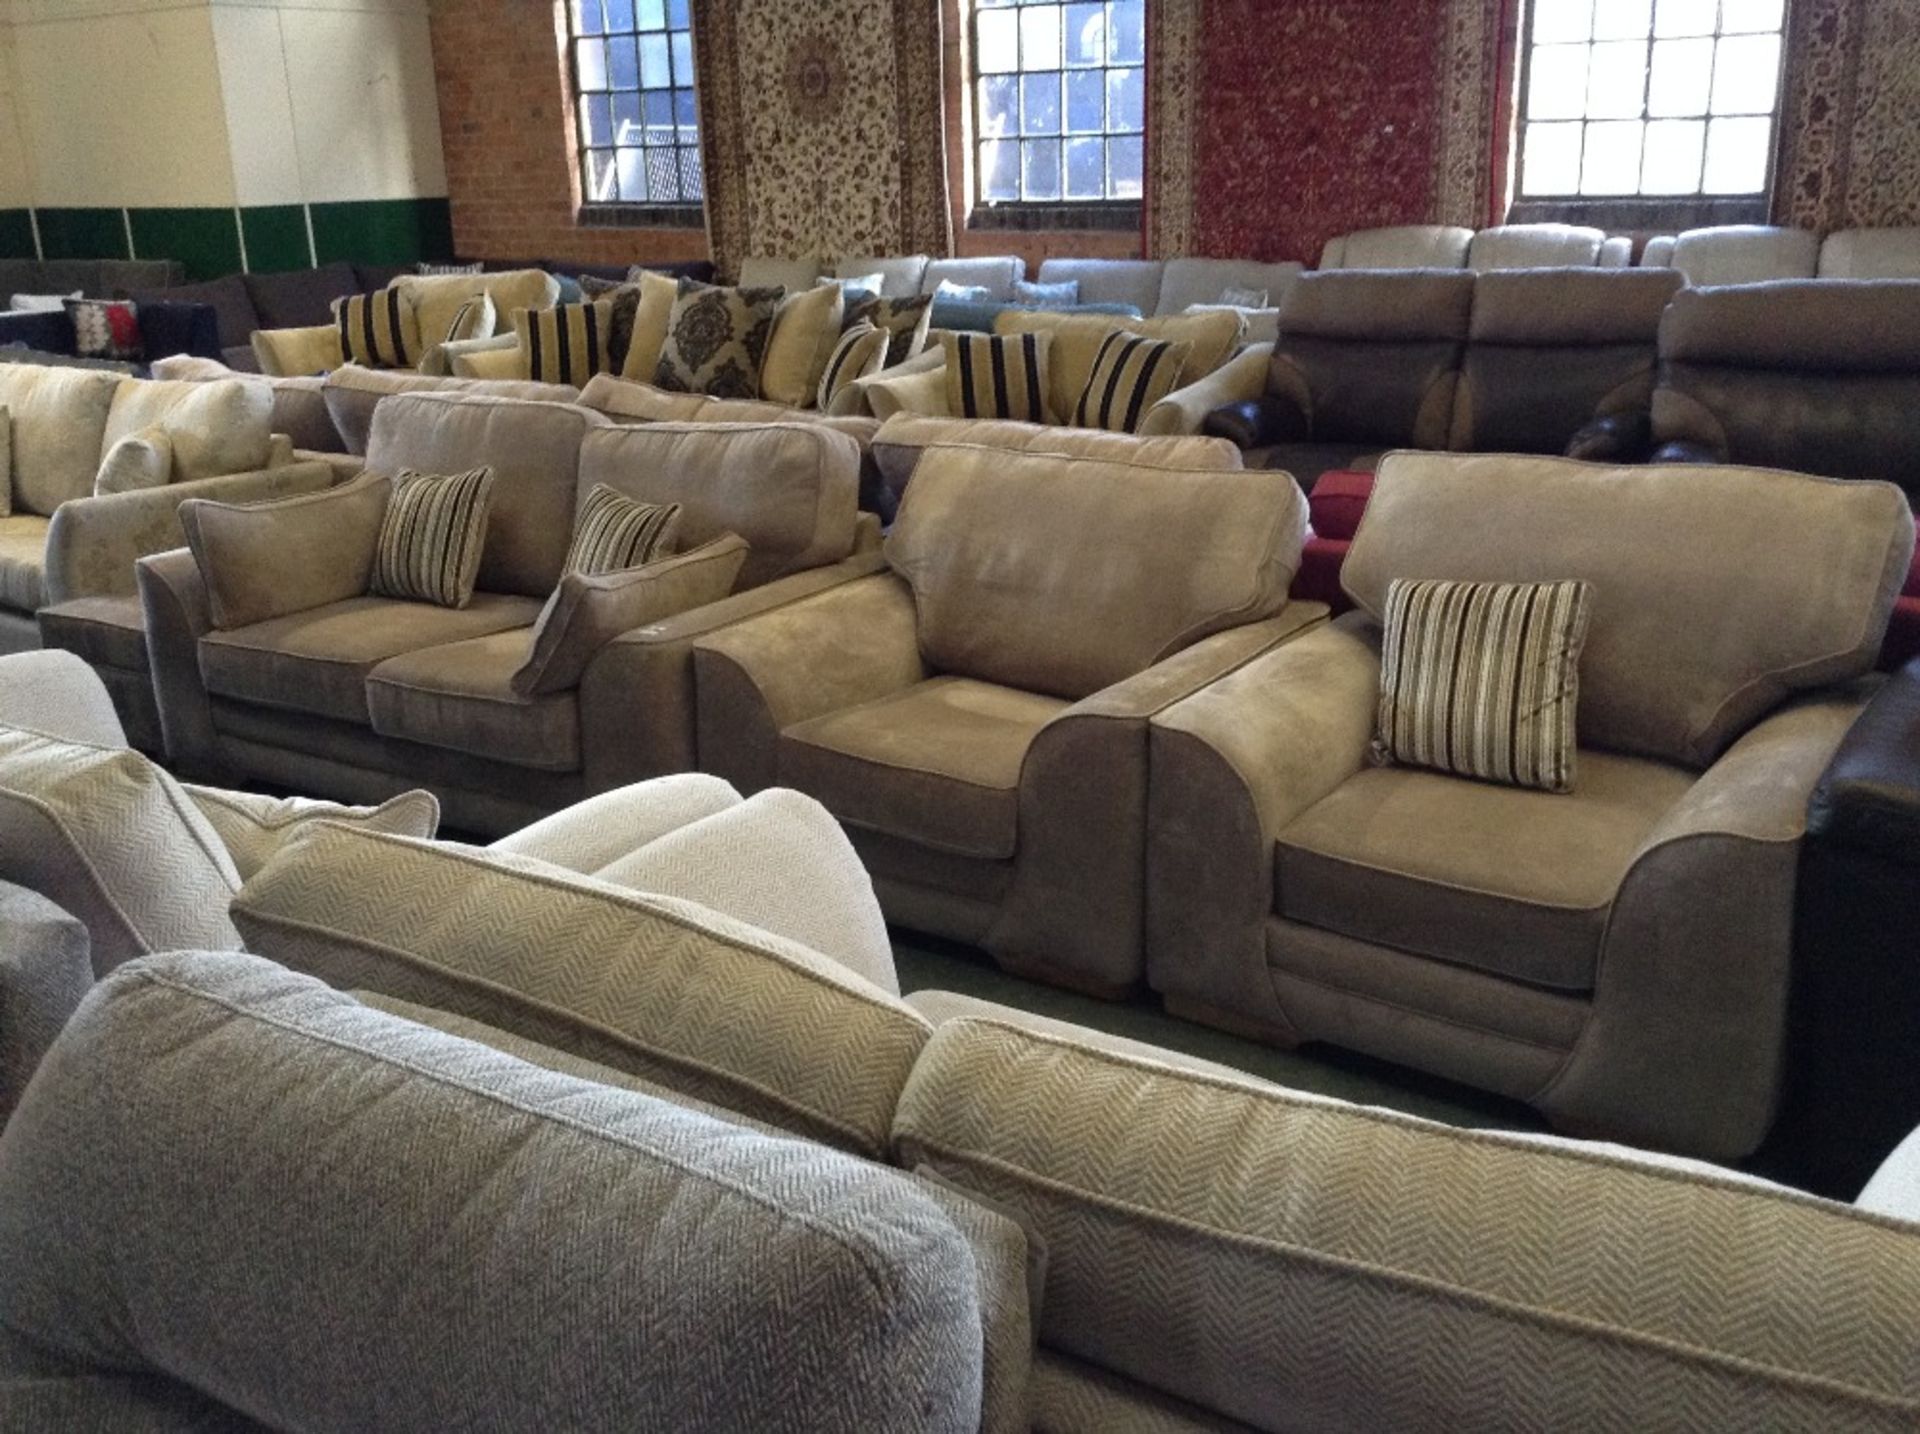 BEIGE 2 SEATER SOFA, 2 x CHAIRS AND STORAGE FOOTST